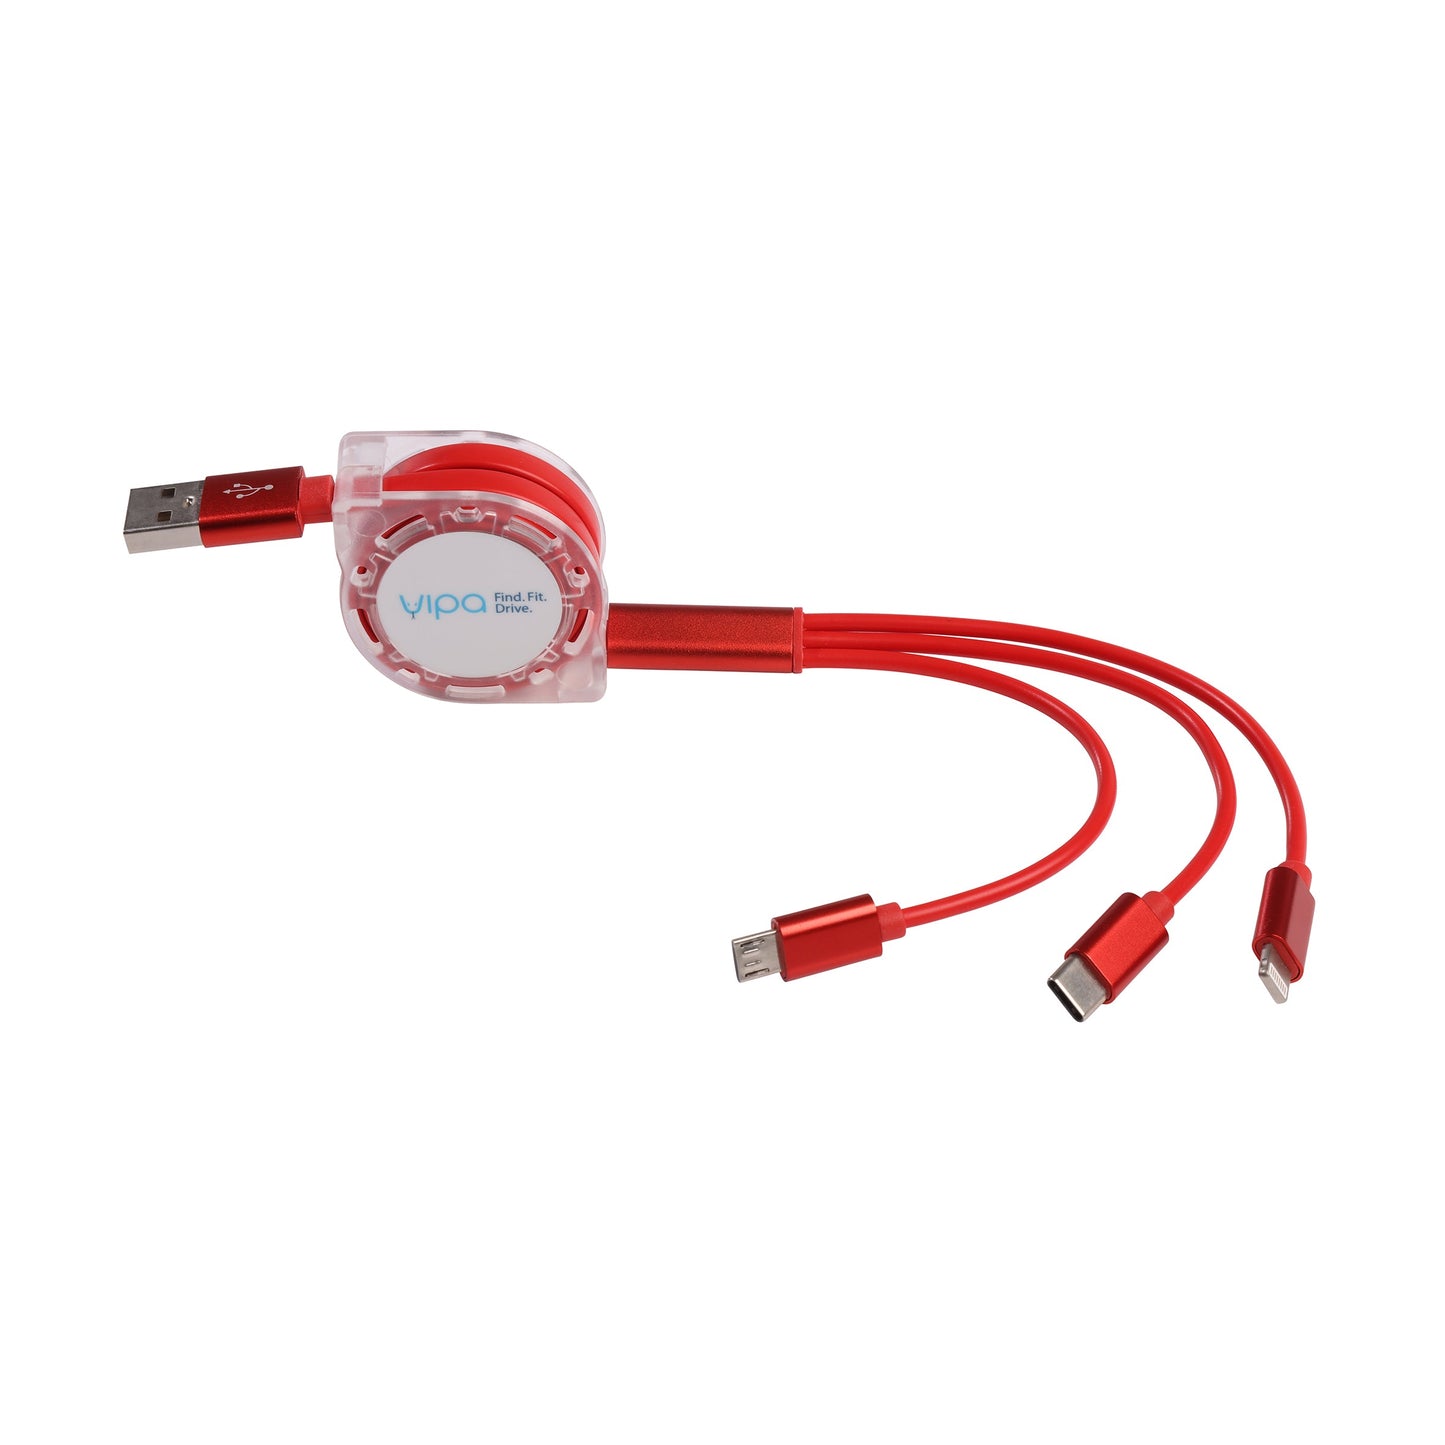 1M RETRACTABLE CHARGING CABLE - 3 IN 1